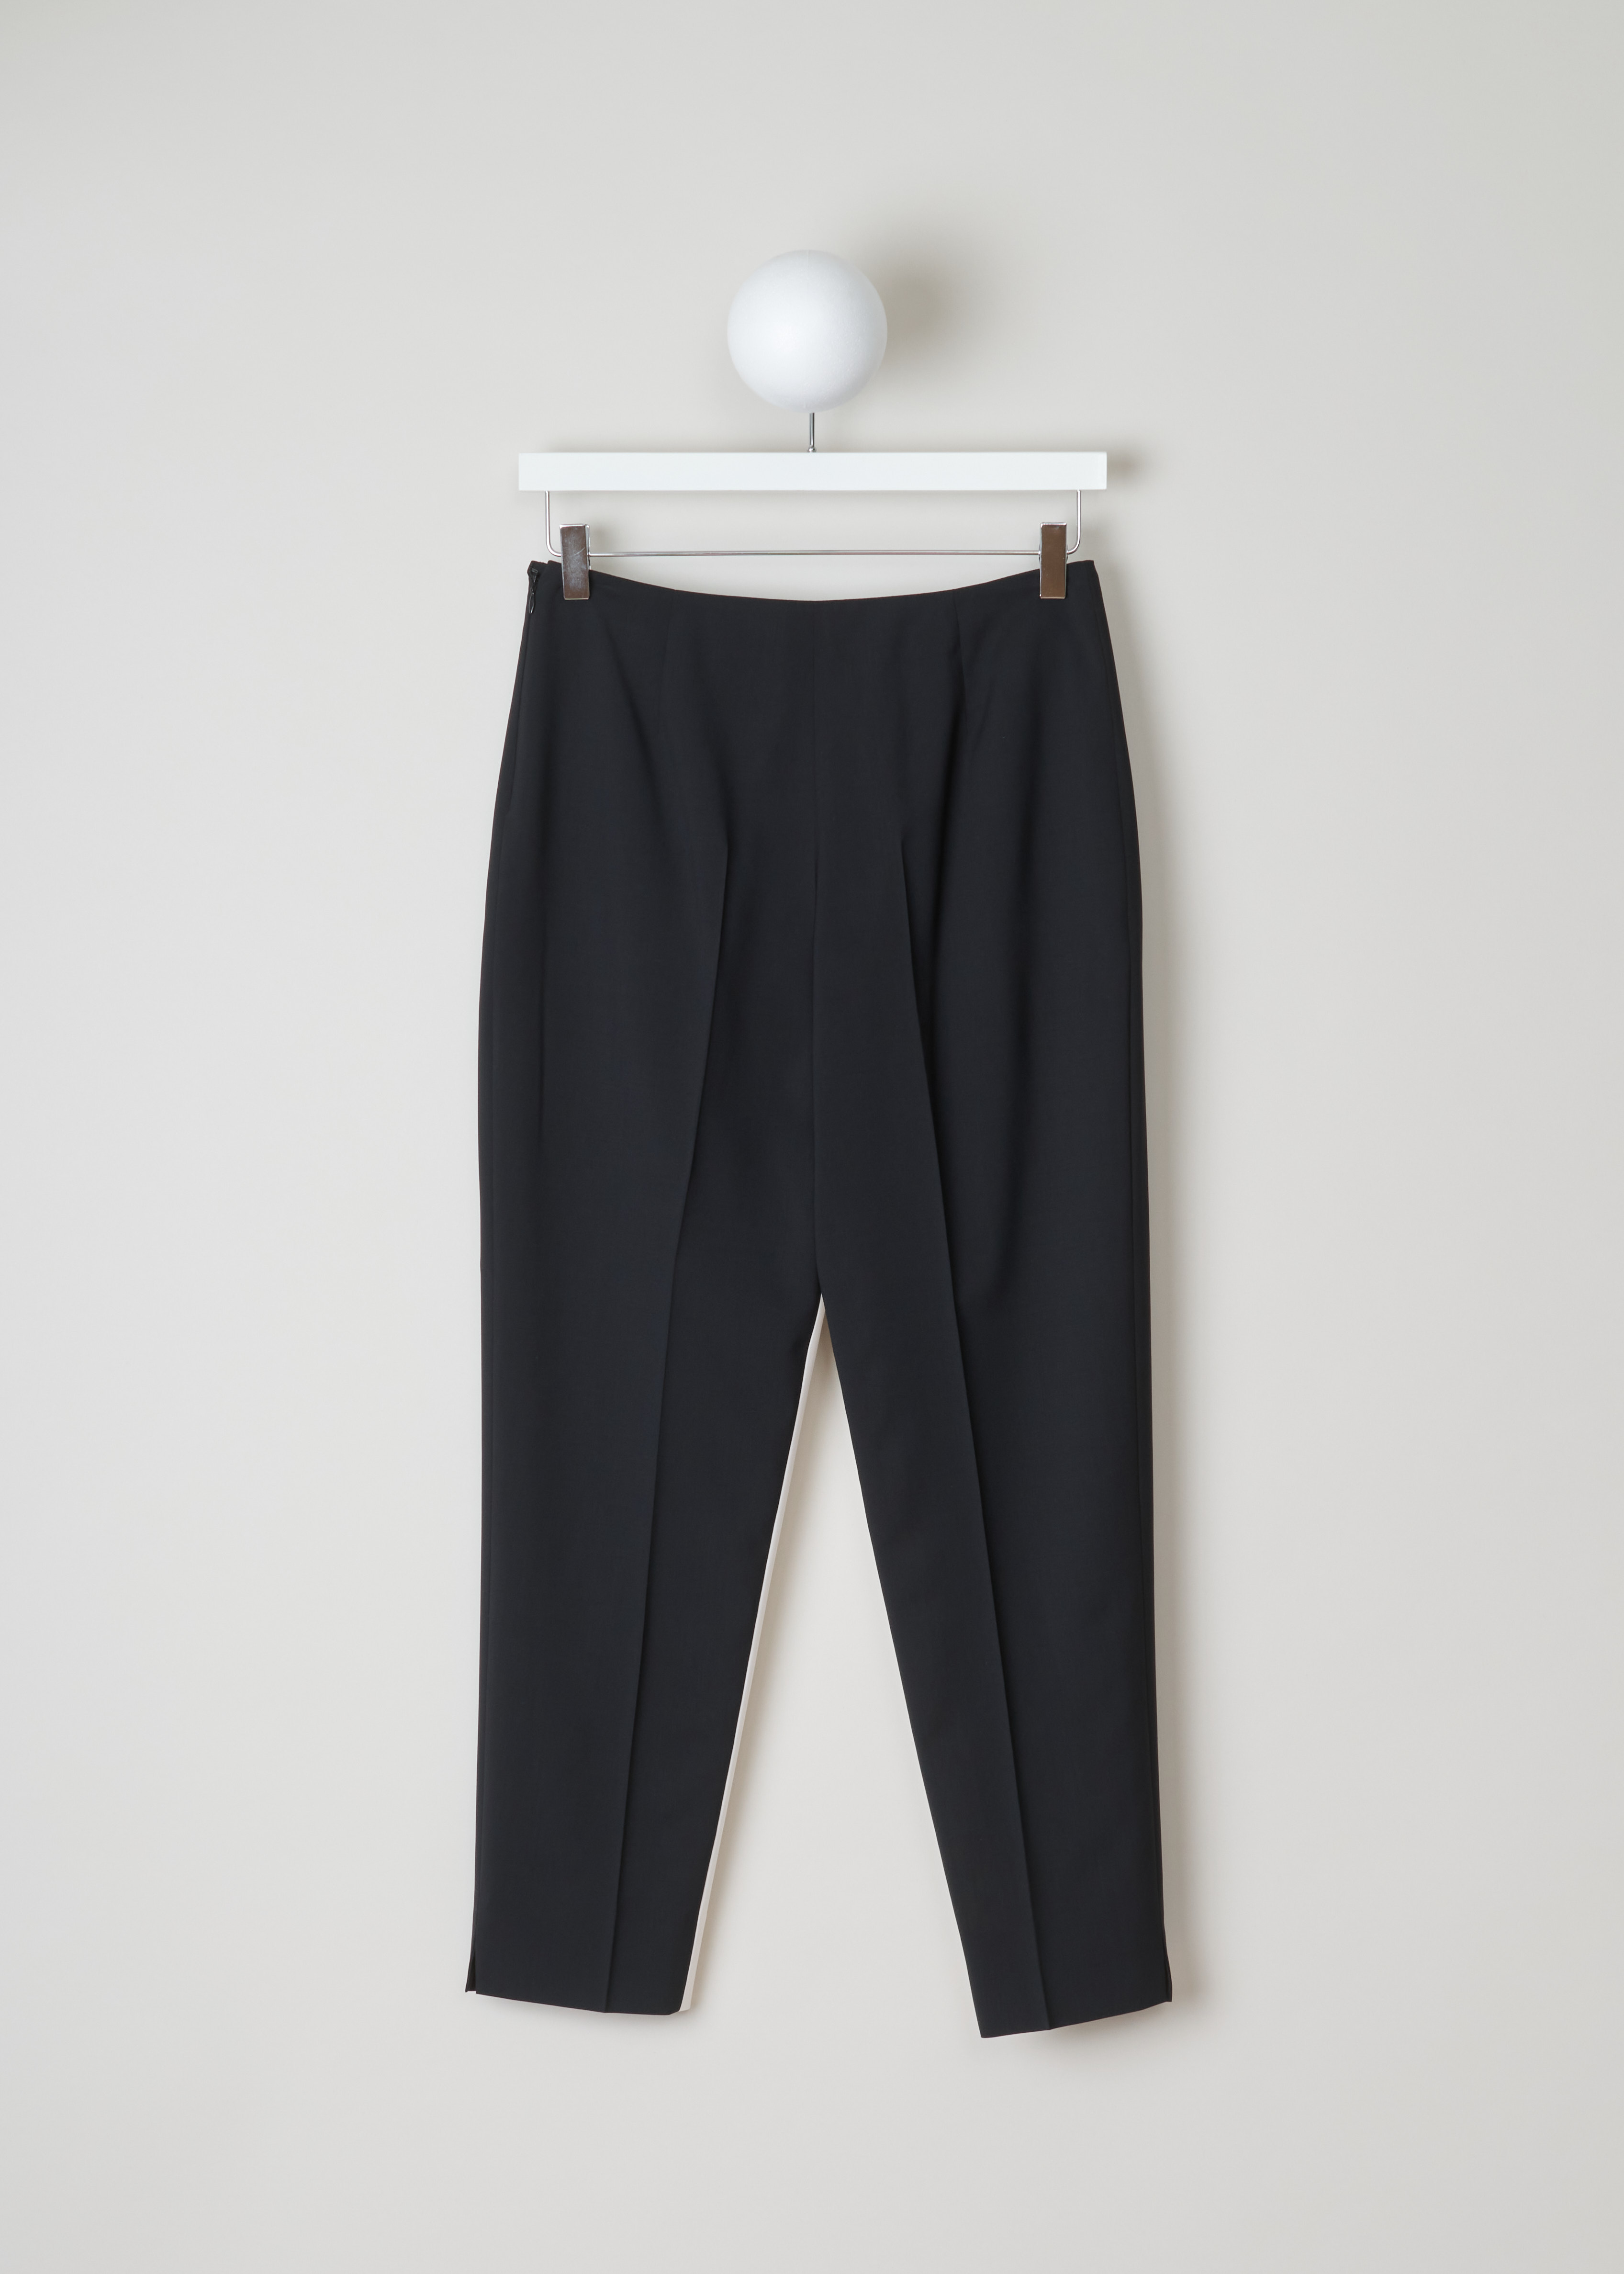 Prada Black and white pants Lana_Leggera_P2798_F0967_Nero_Bianco nero bianco back. Black trousers with a white panel on the inside of the legs, centre creases and an invisible zipper on the side.